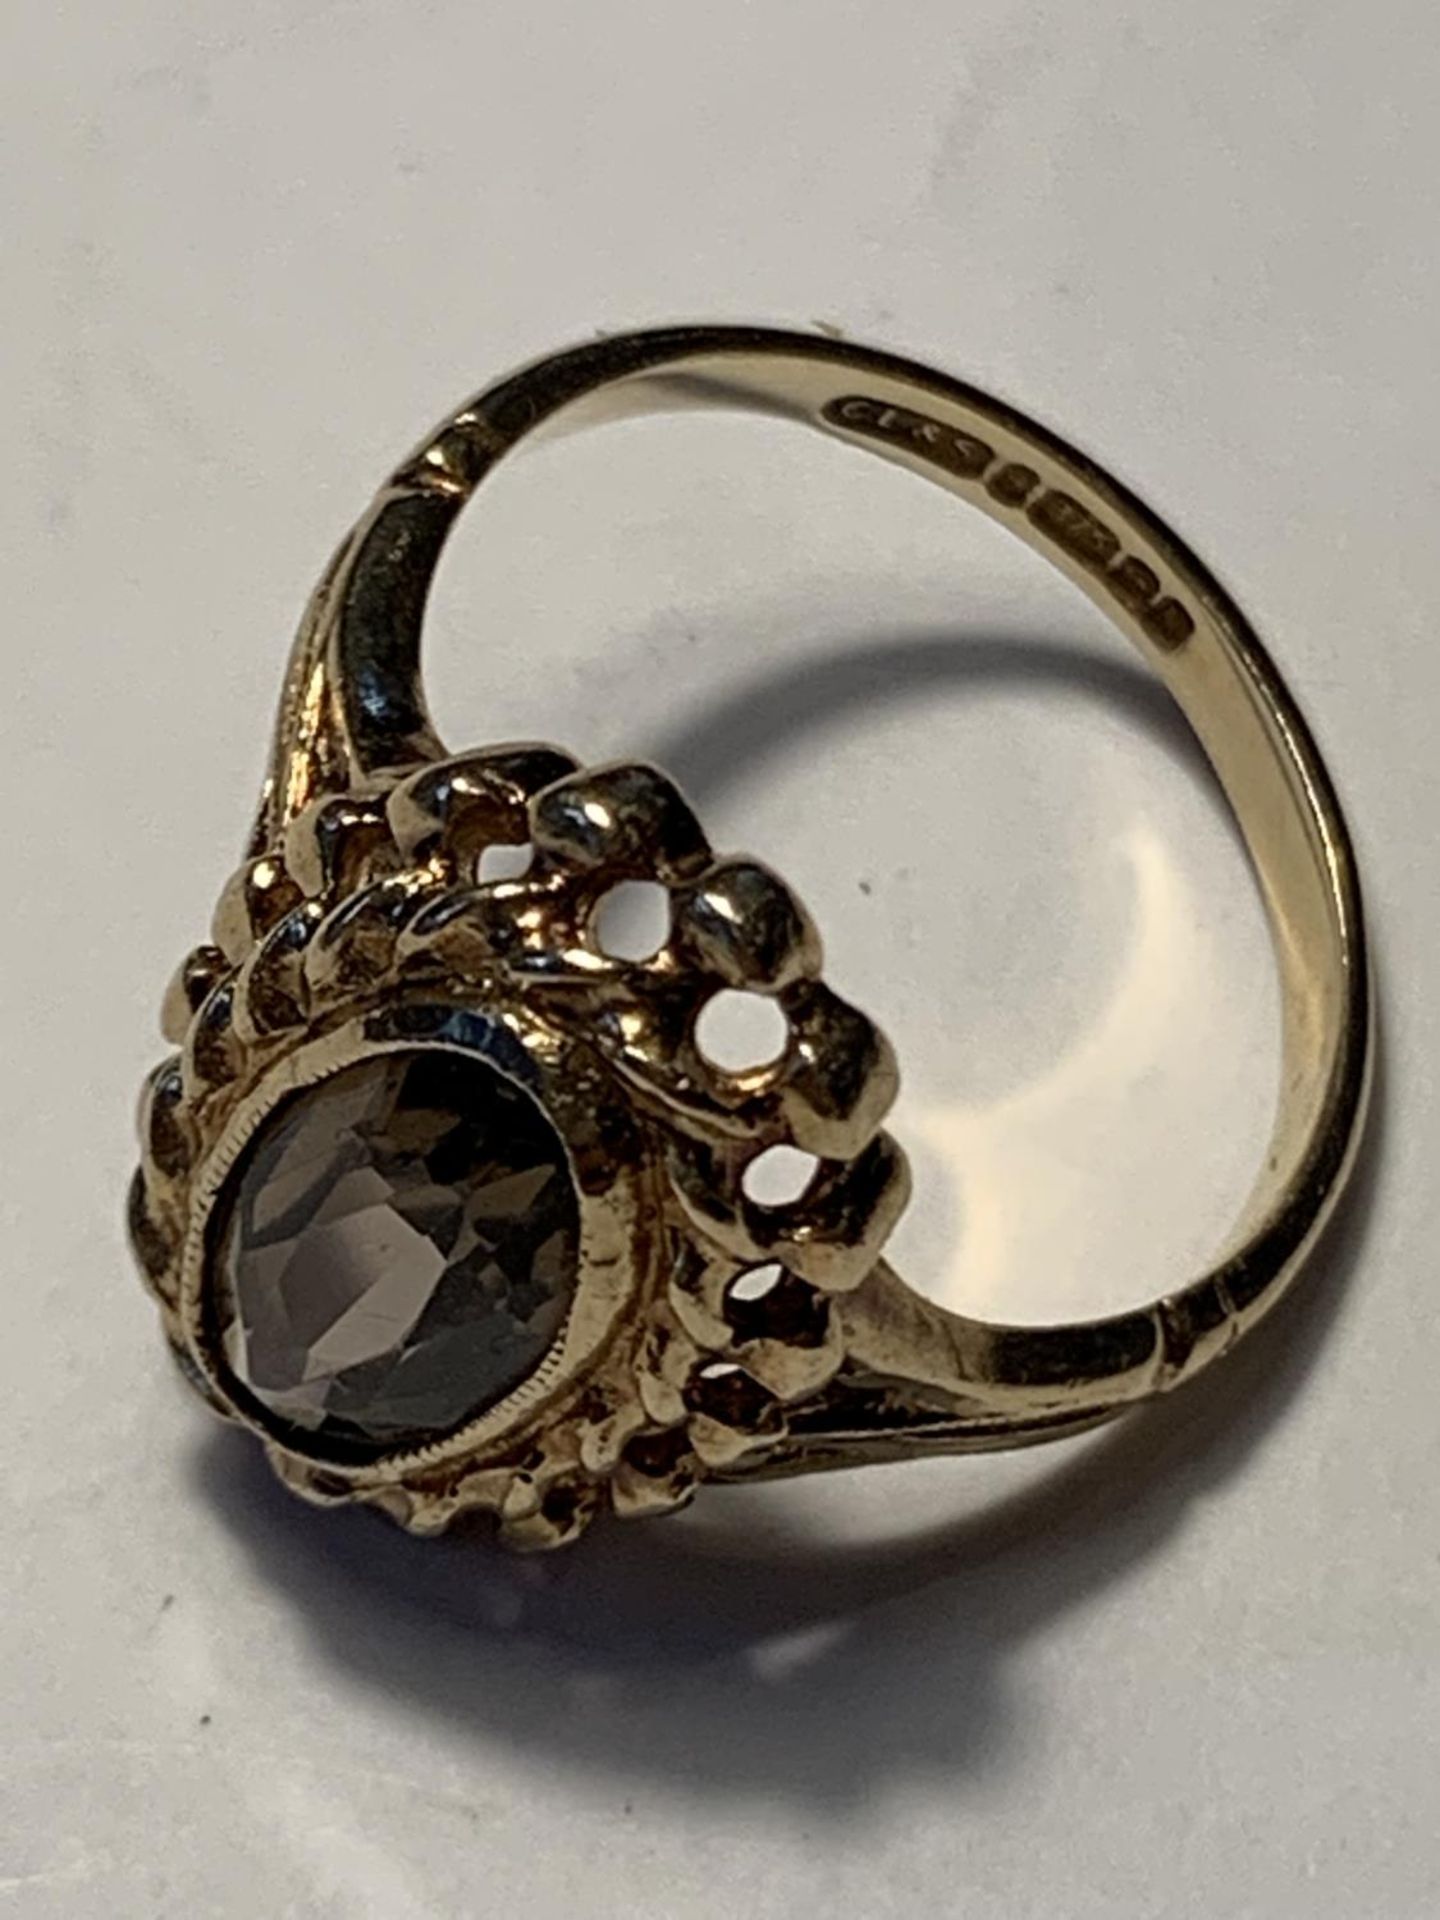 A 9 CARAT GOLD RING WITH AN OVAL SOLITAIRE STONE SIZE K GROSS WEIGHT 2.58 GRAMS - Image 3 of 3